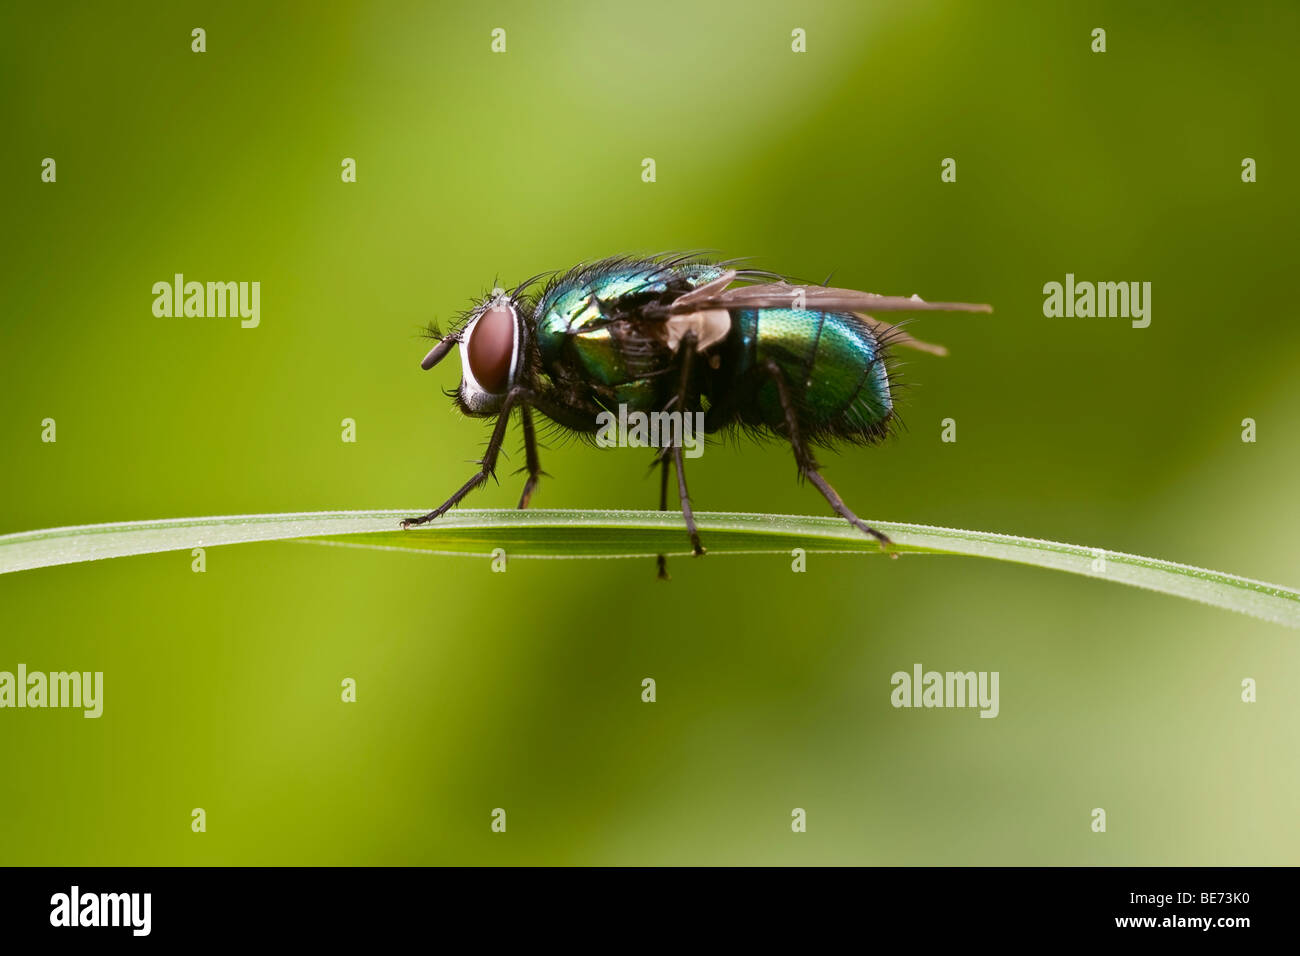 Greenbottle fly (Lucilia caesar) Foto Stock